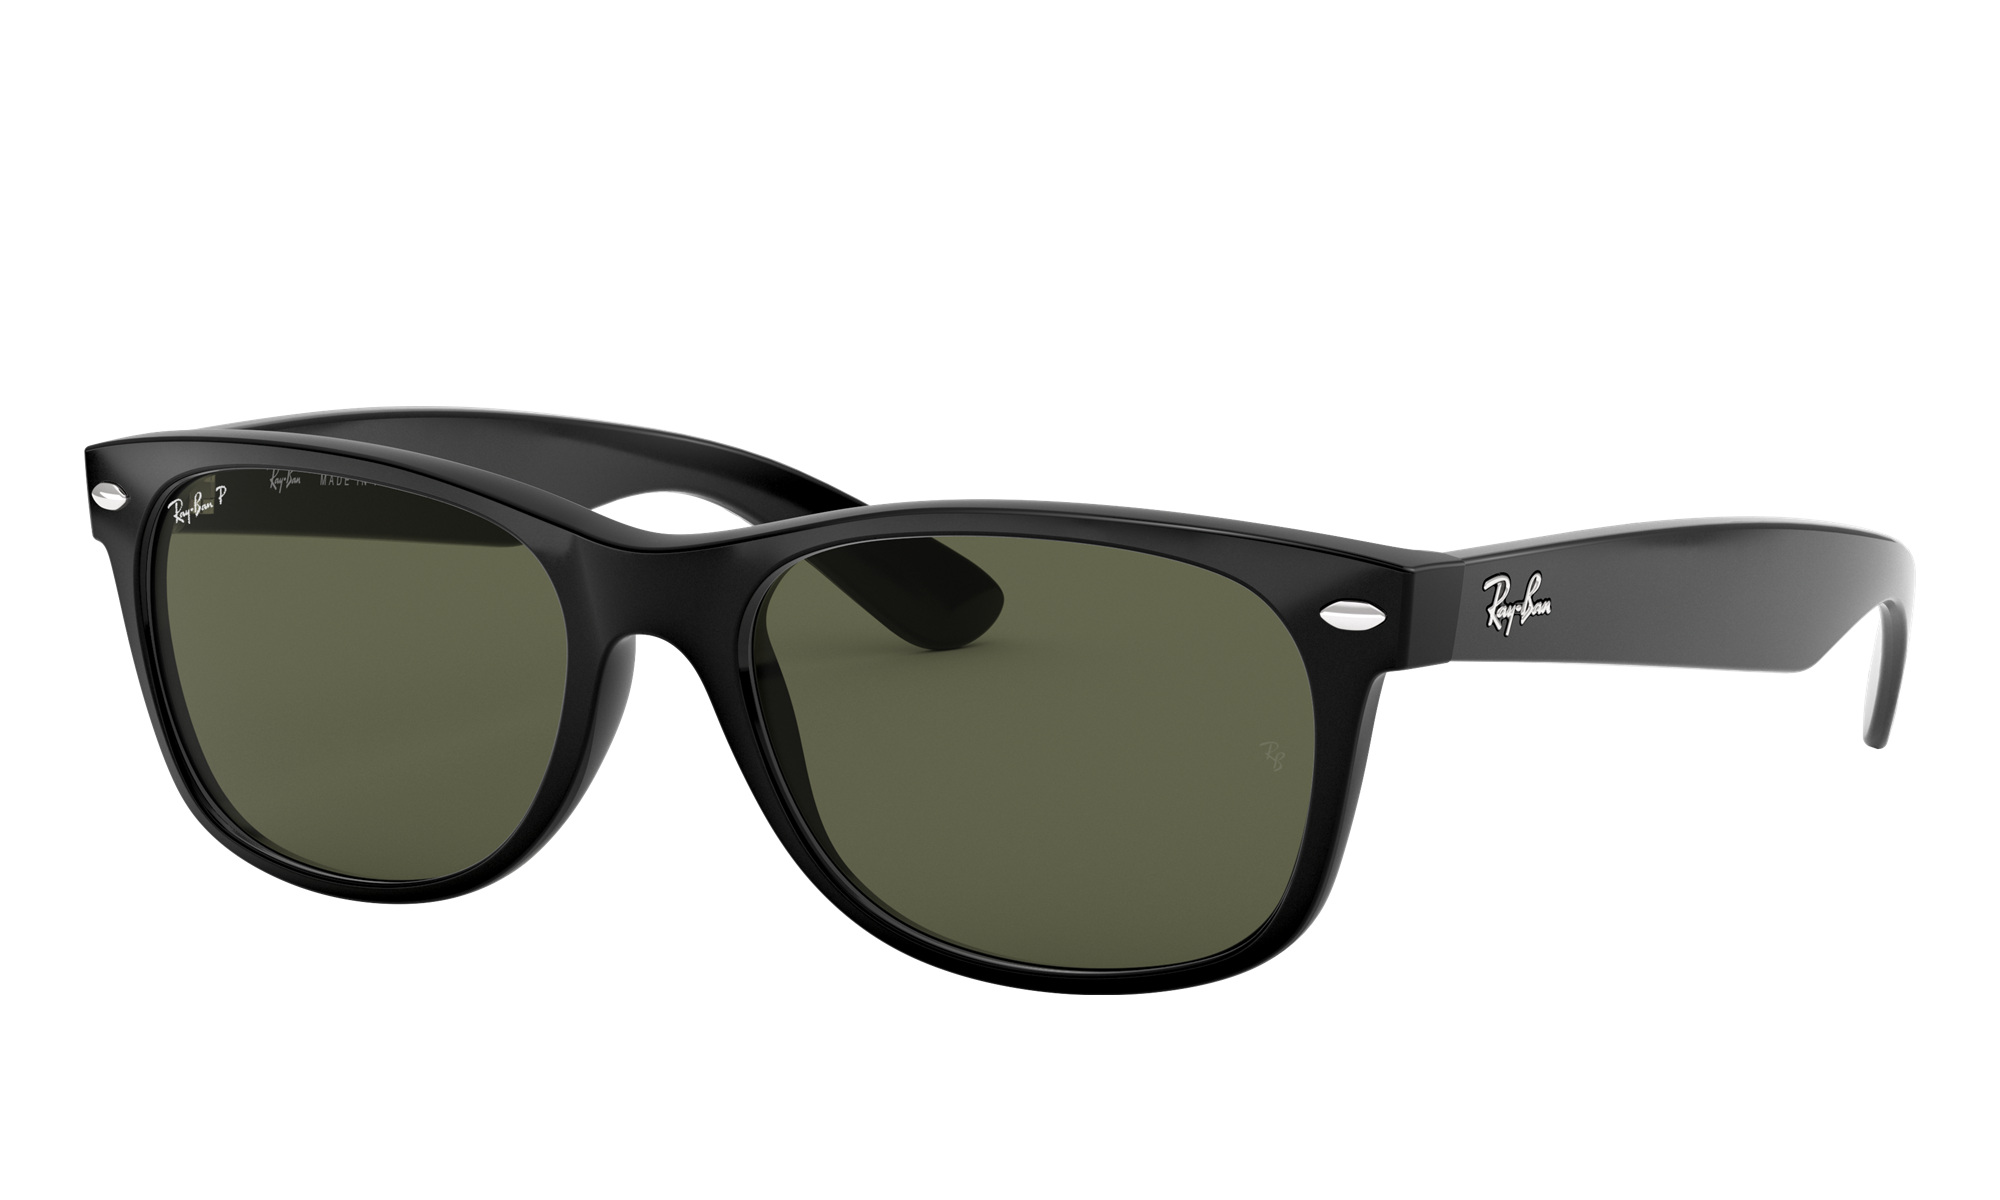 Ray-Ban Unisex Rb2132 Black Size: Small -  RB2132 901/58 52-18